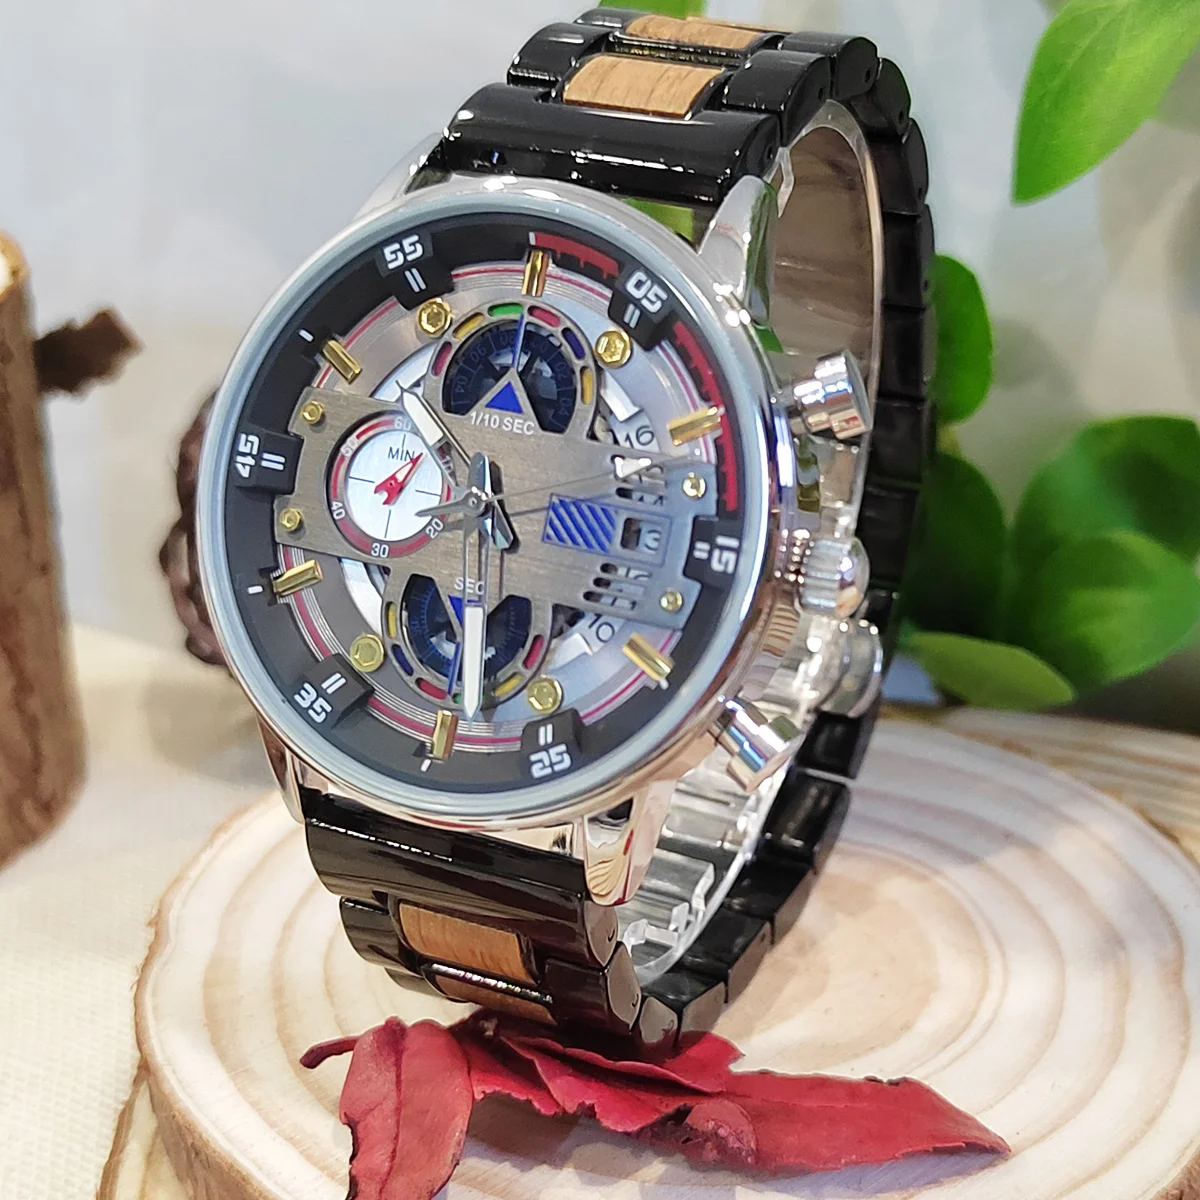 

Wood Wrist Watches for Men Waterproof Watch with Unique Designs Timepieces Chronograph Dropshipping Ckock Men's Wooden Watch